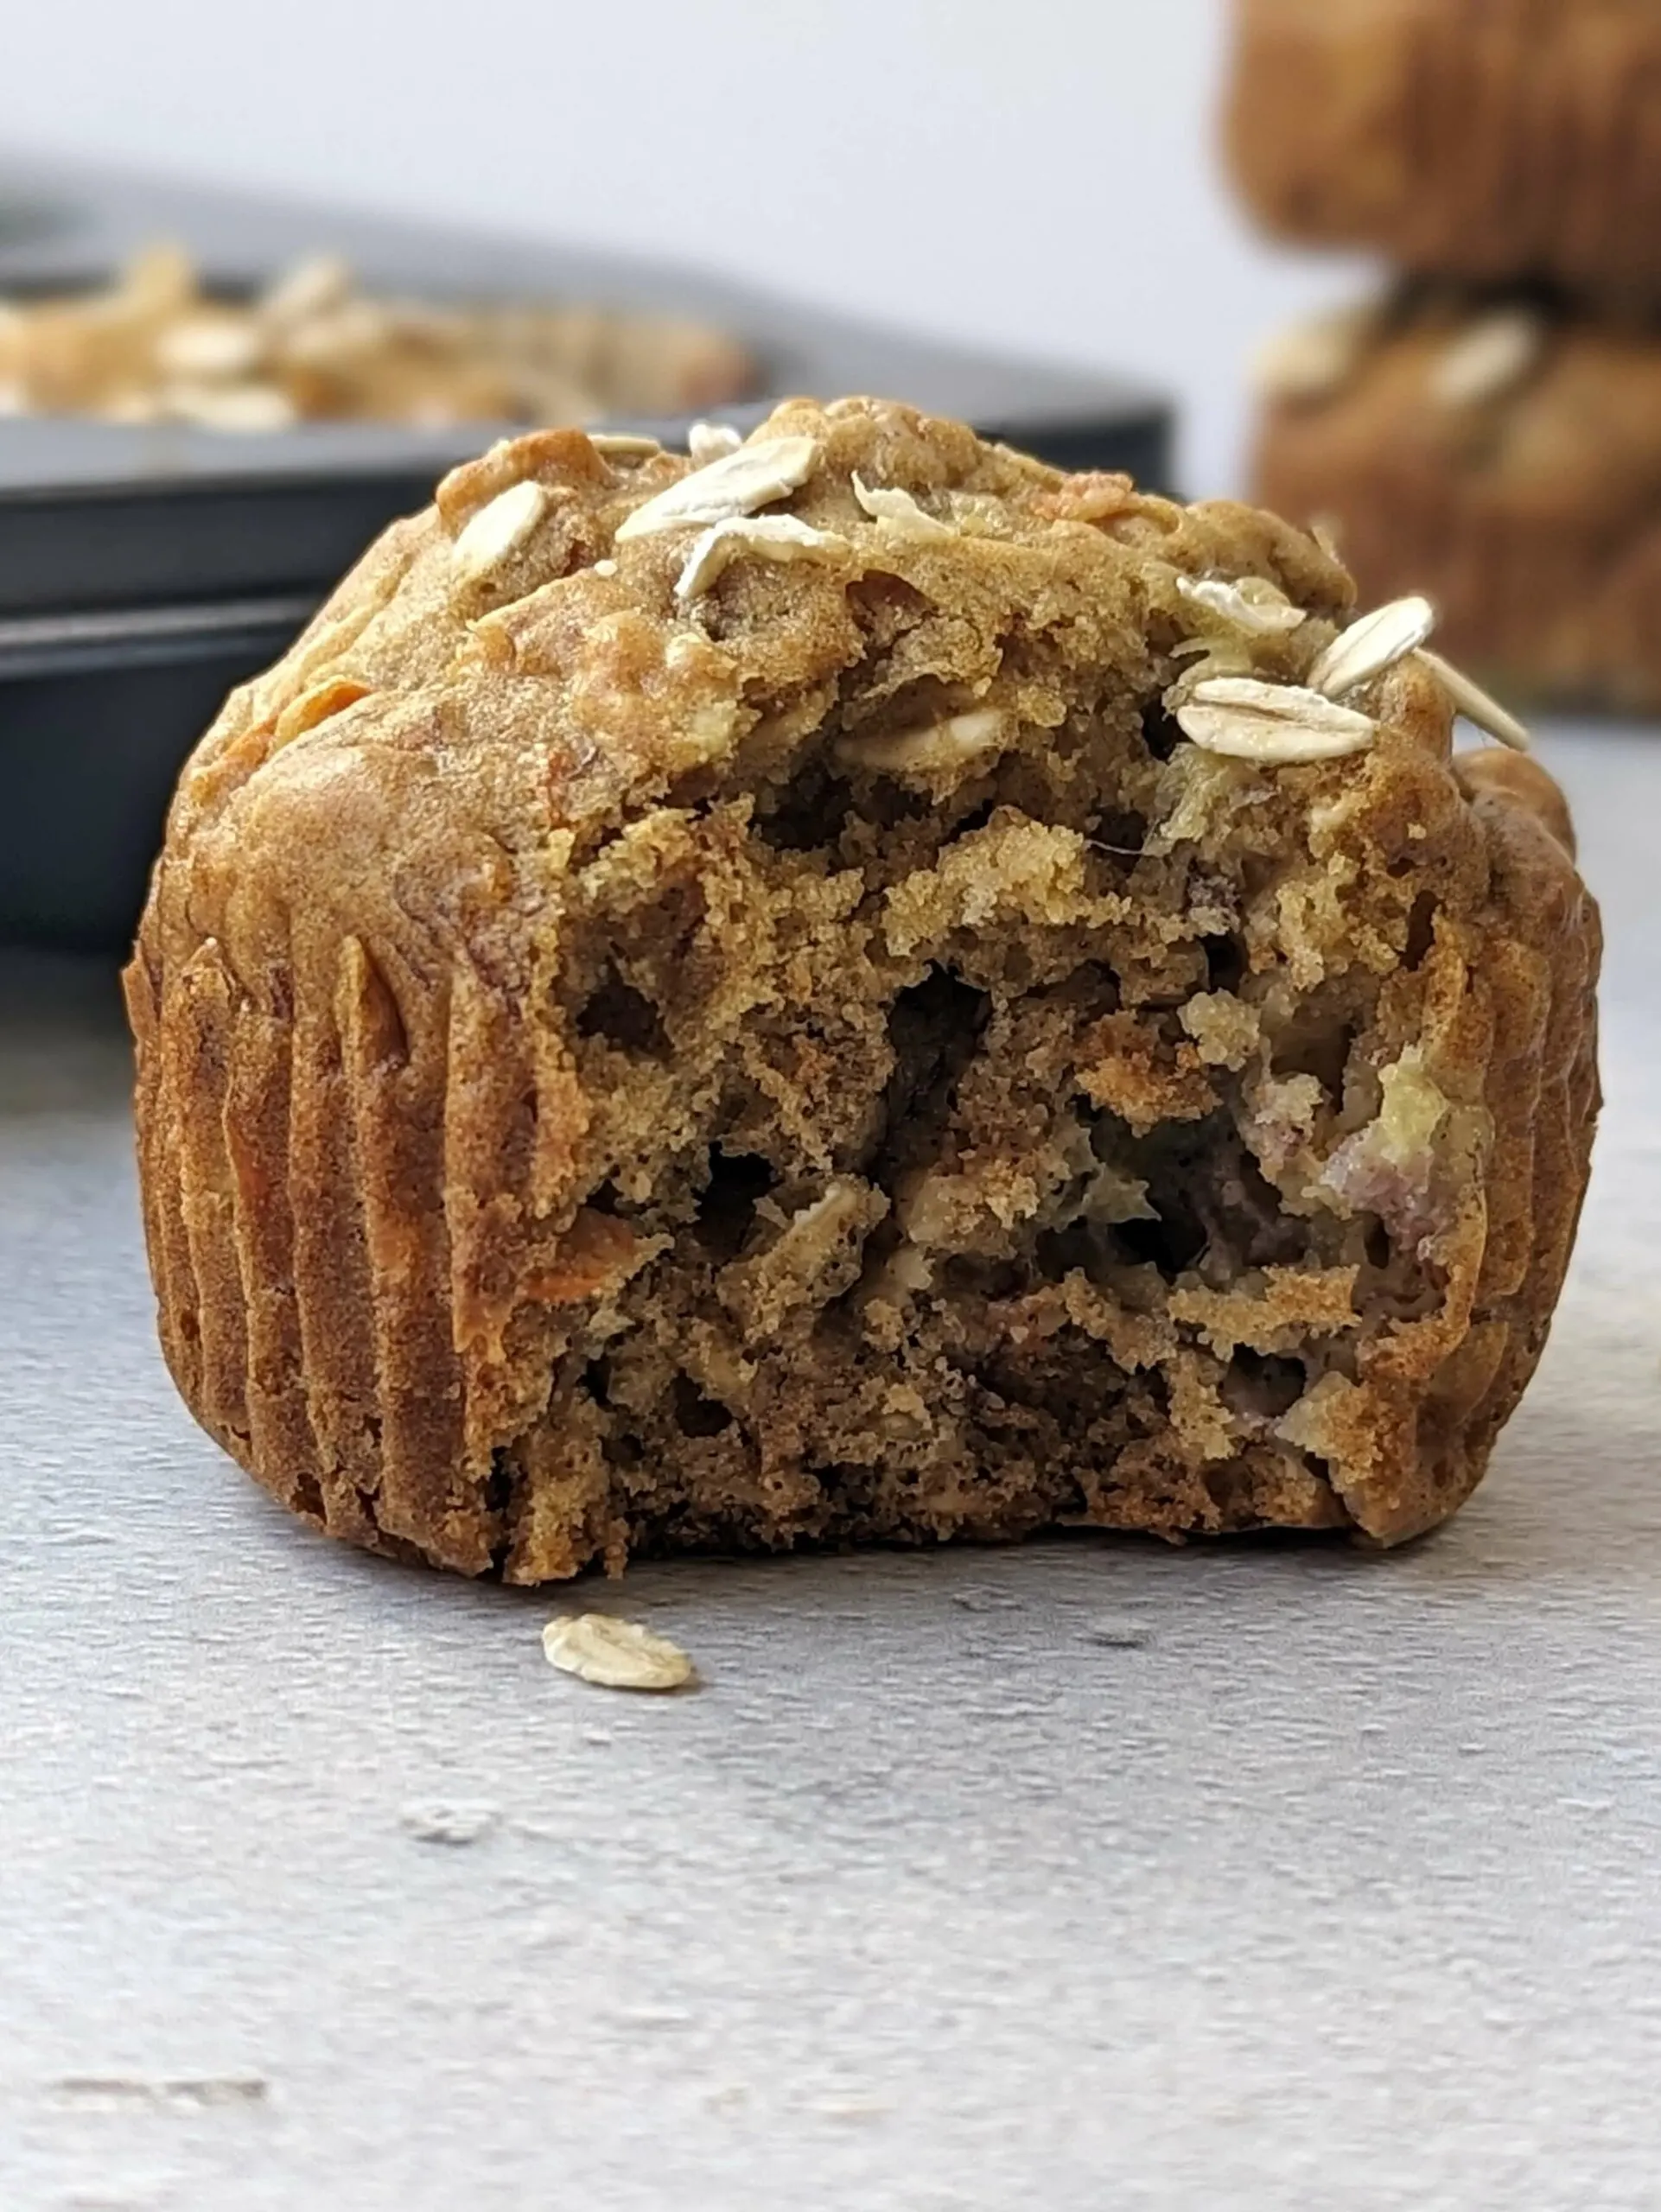 A close up of a banana carrot muffin with a bite in it and muffins in the background.